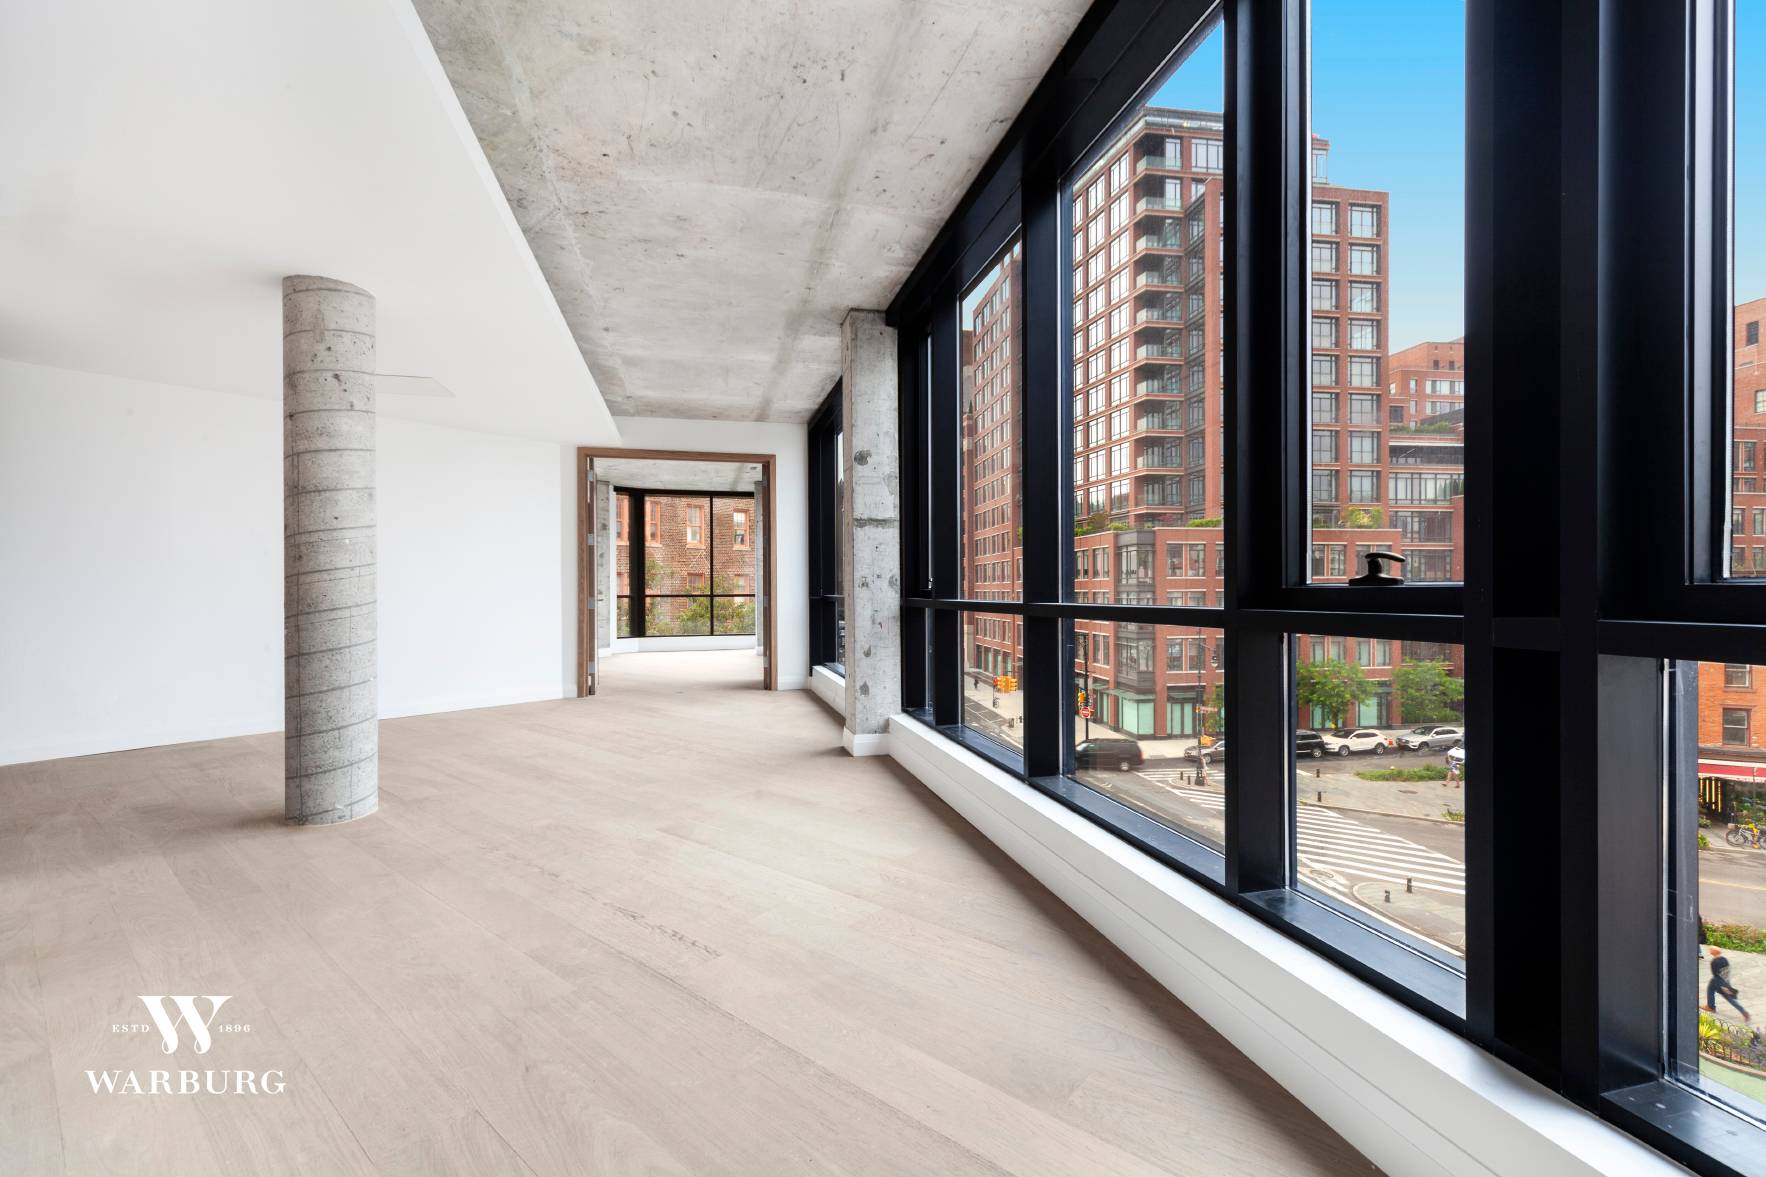 Developed by The Jackson Group and designed by SRA Architecture Engineering with interiors by Ovadia Design Group to accommodate high end contemporary living, 200 West 11th Street on the corner ...